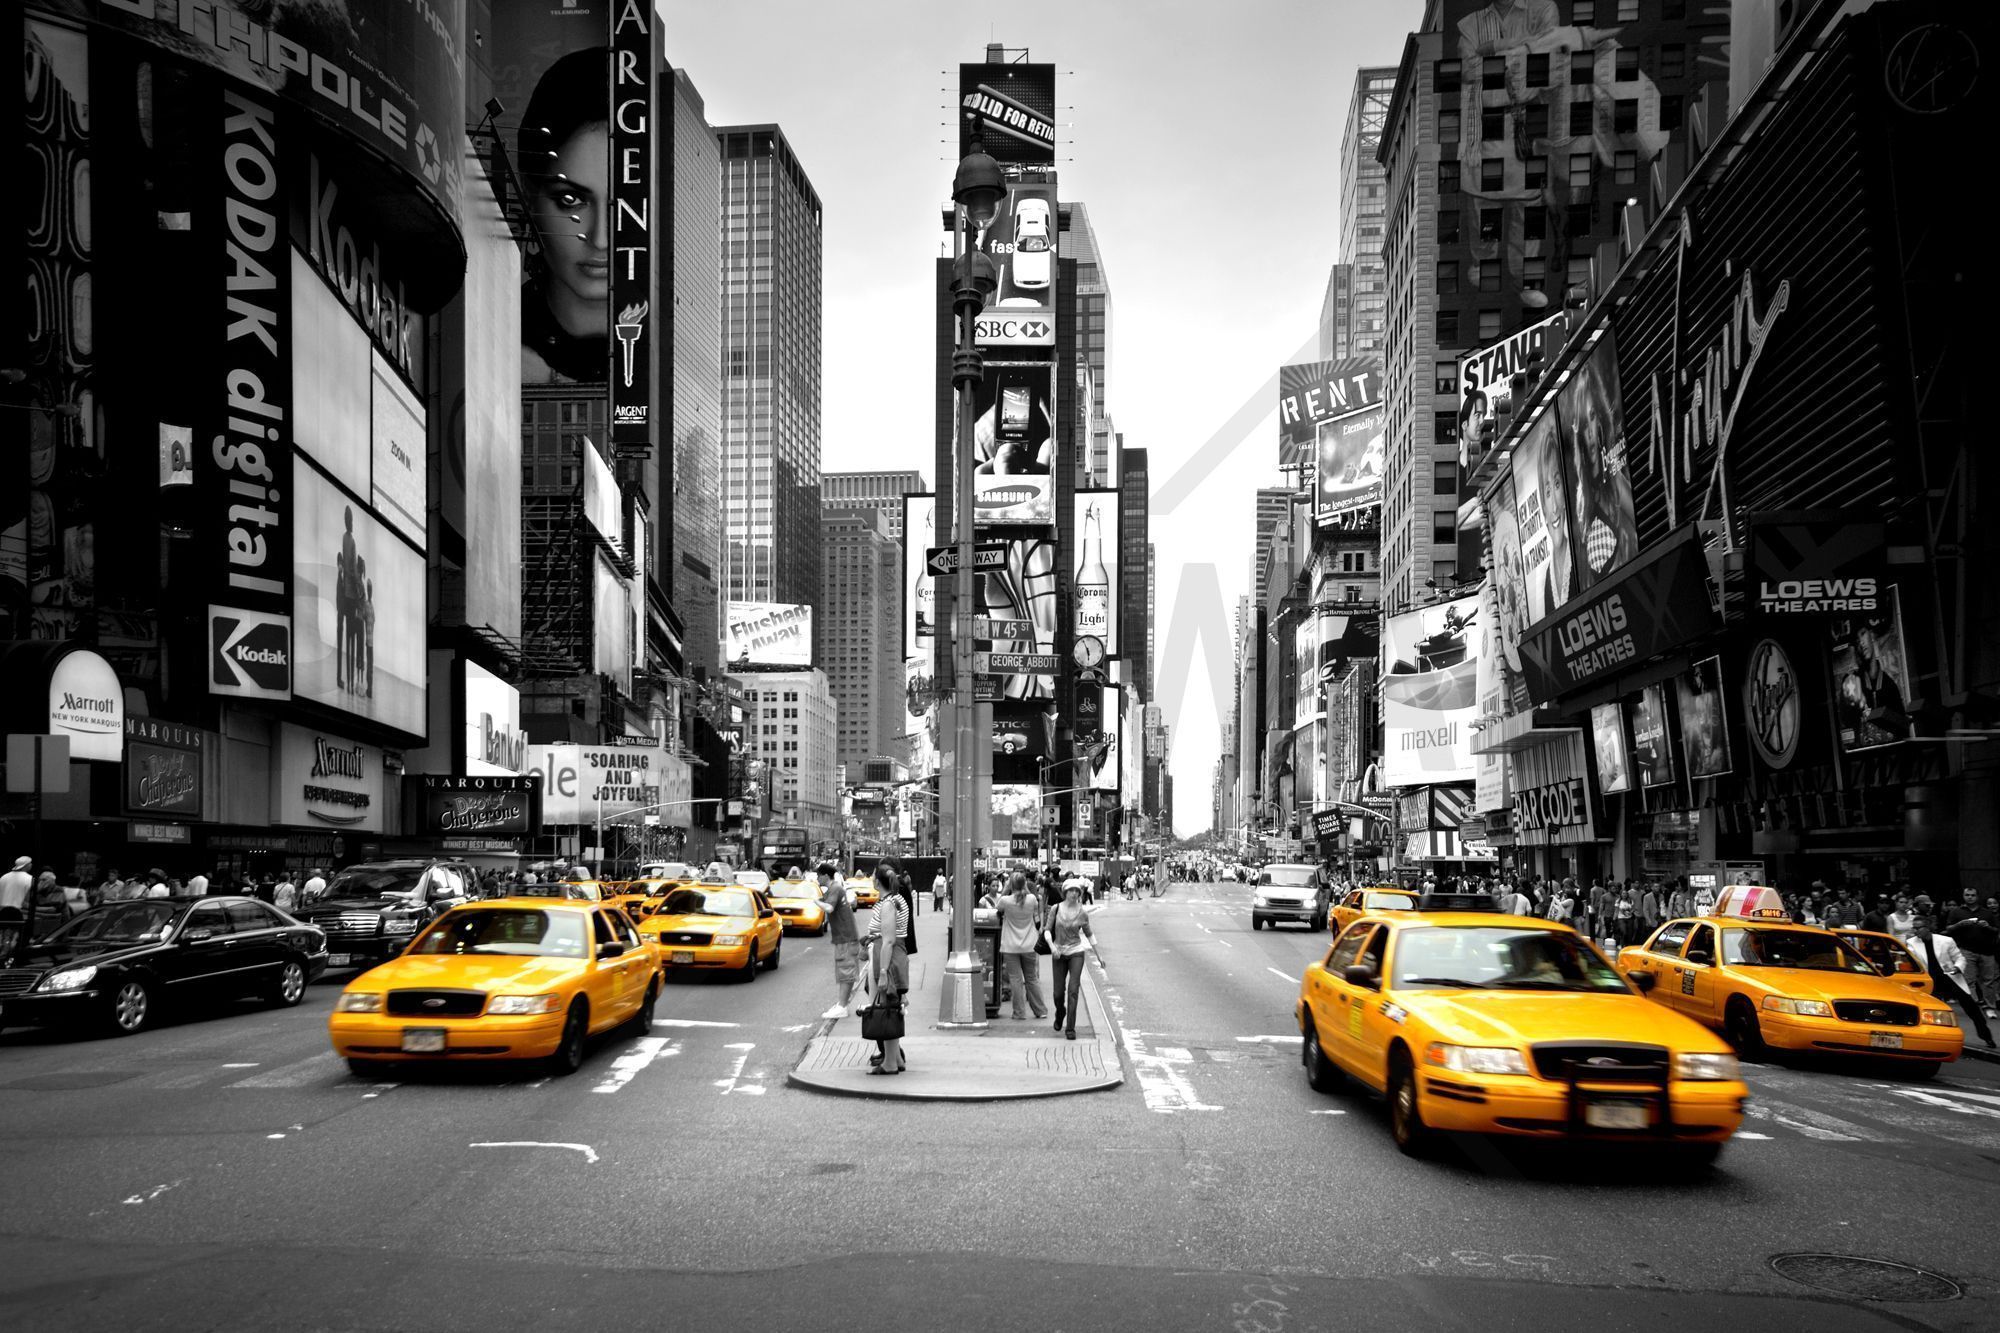 Times Square - Cabs Colorsplash - Wall Mural & Photo Wallpaper ...